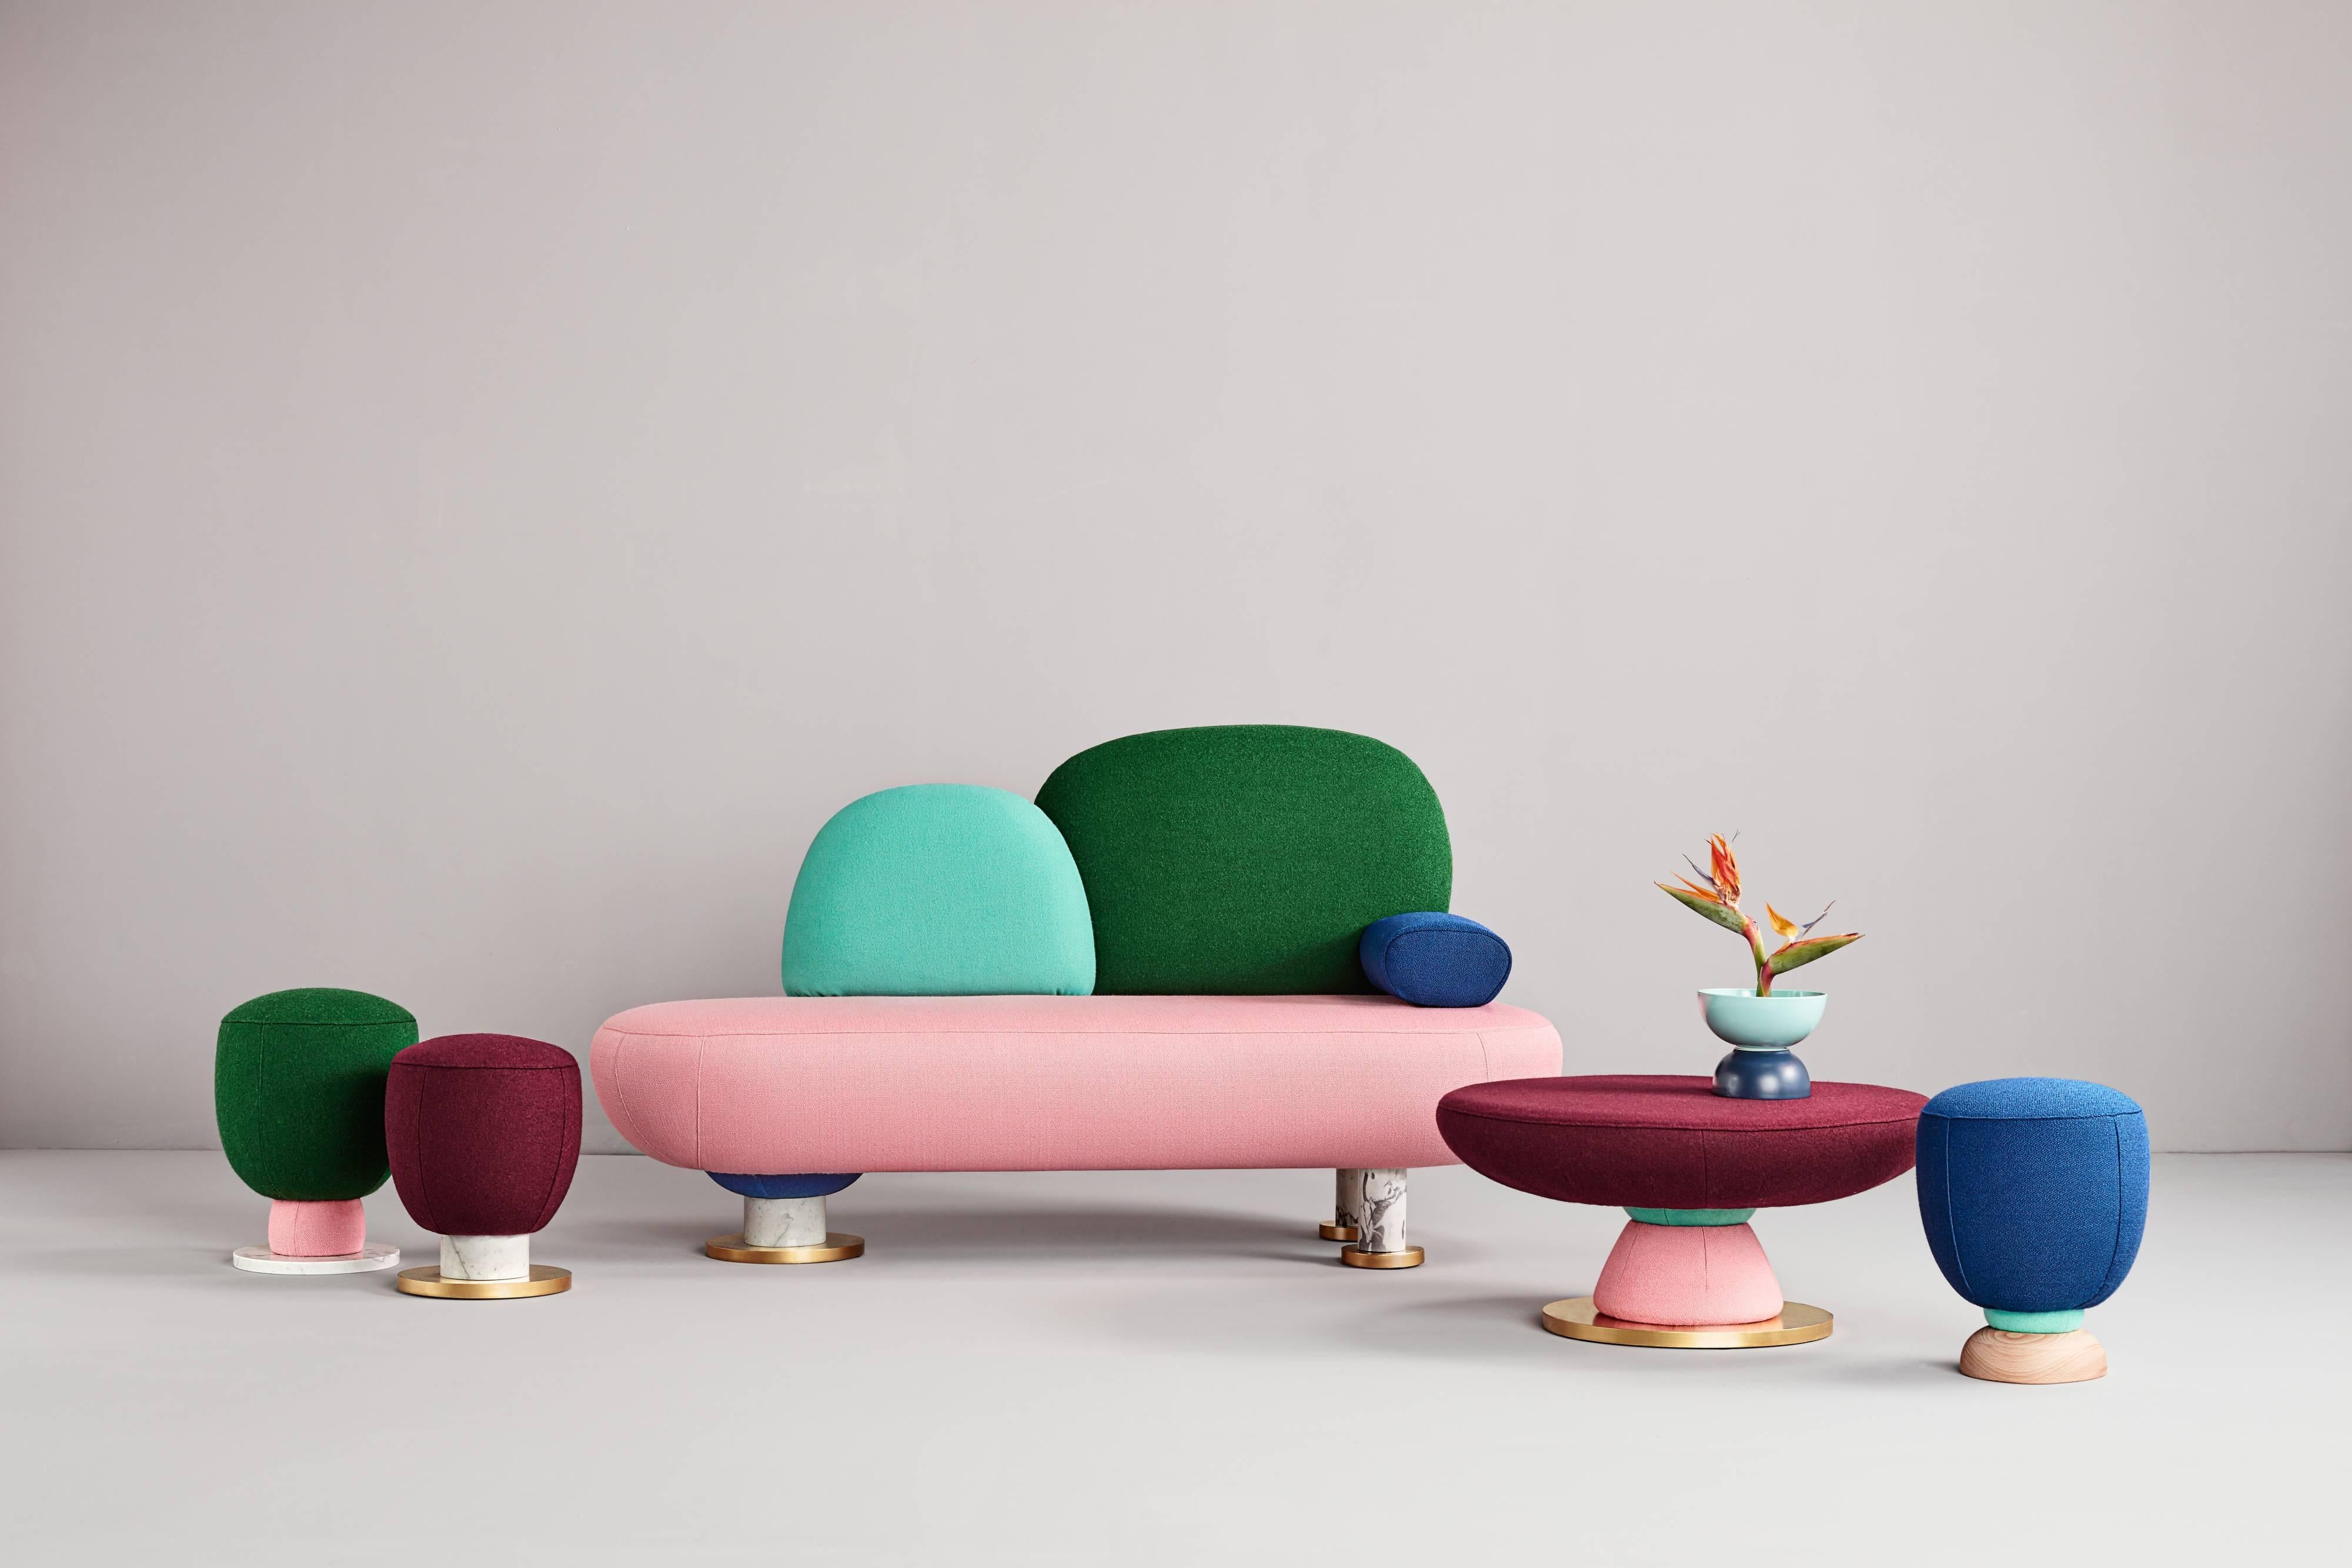 Toadstool collection sofa, Masquespacio

This collection of puffs, table and sofa bench designed by Masquespacio is inspired in the visual culture and graphic design always present one way
or another in the creative consultancy projects. The